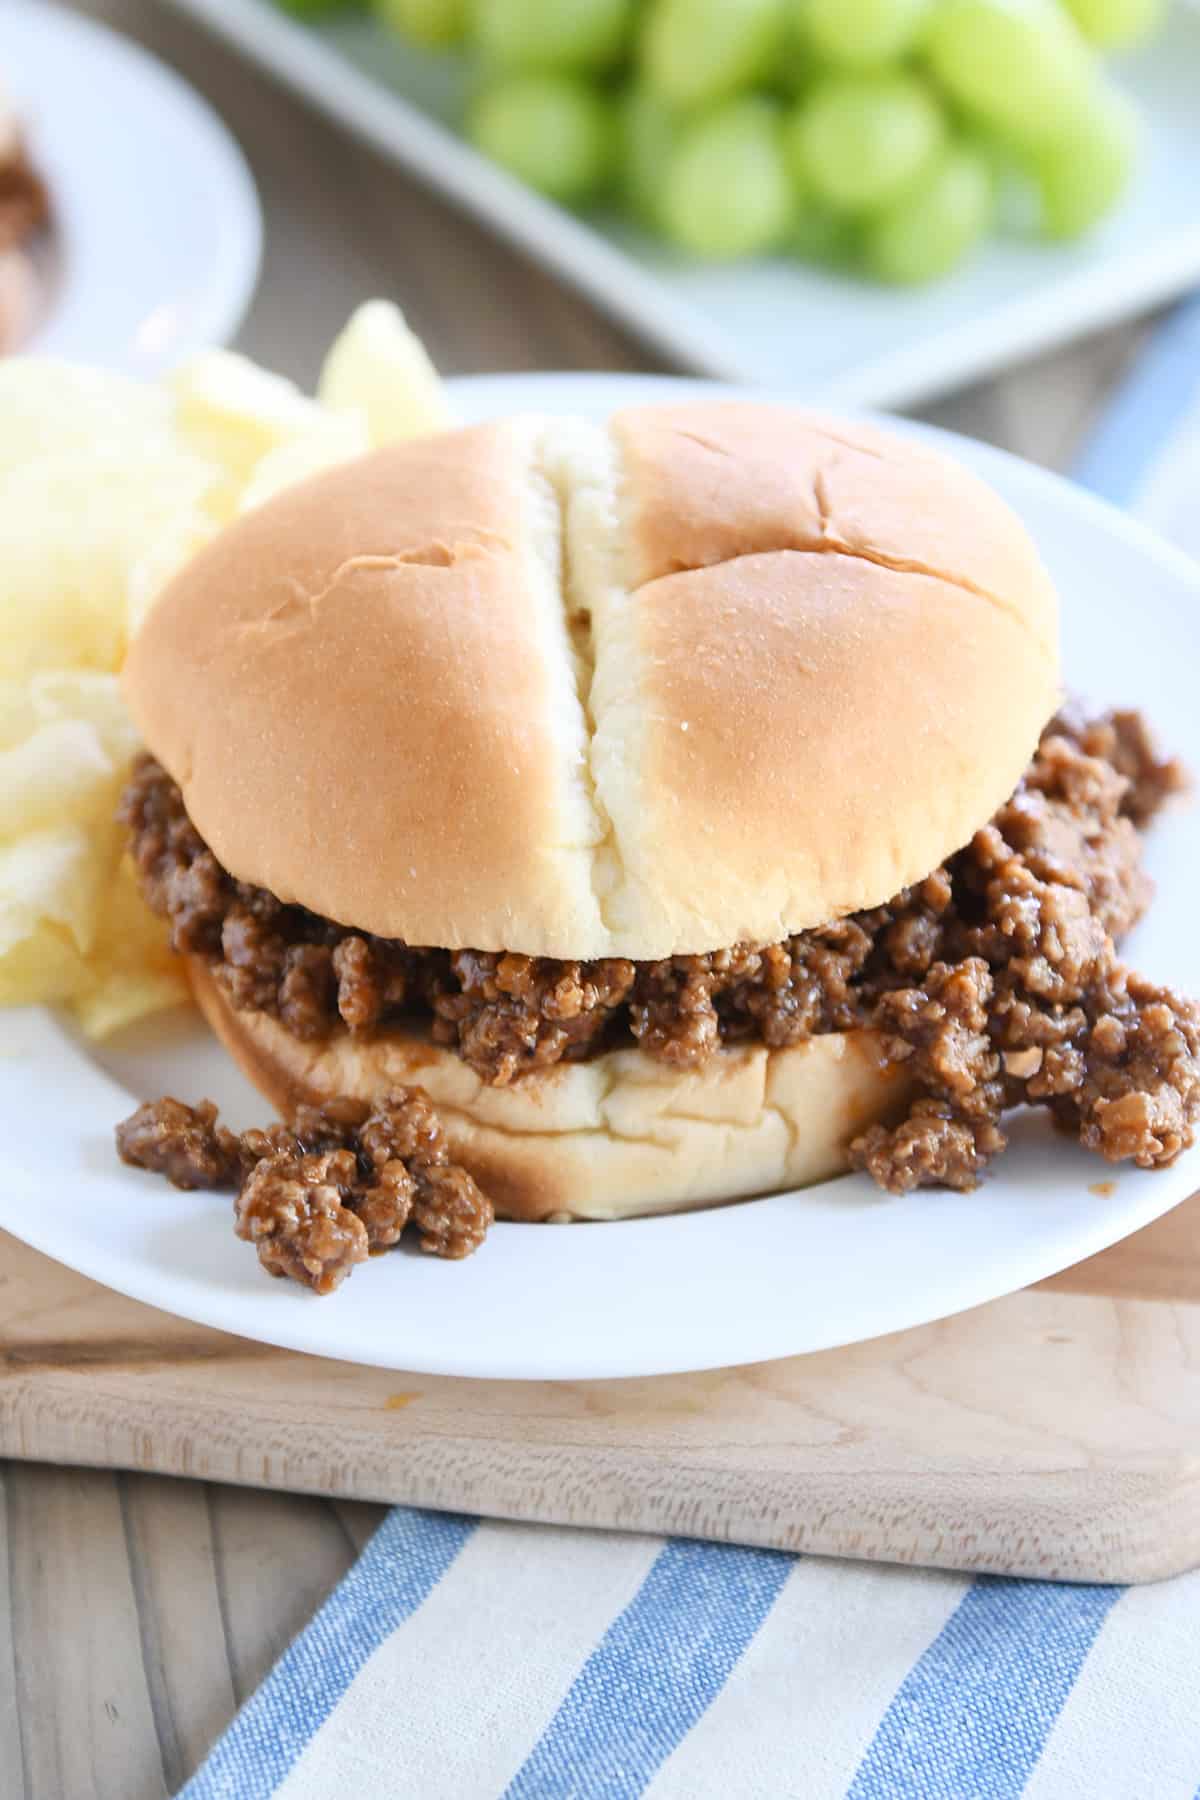 The Best Sloppy Joes Recipe {Tried-and-True Favorite}